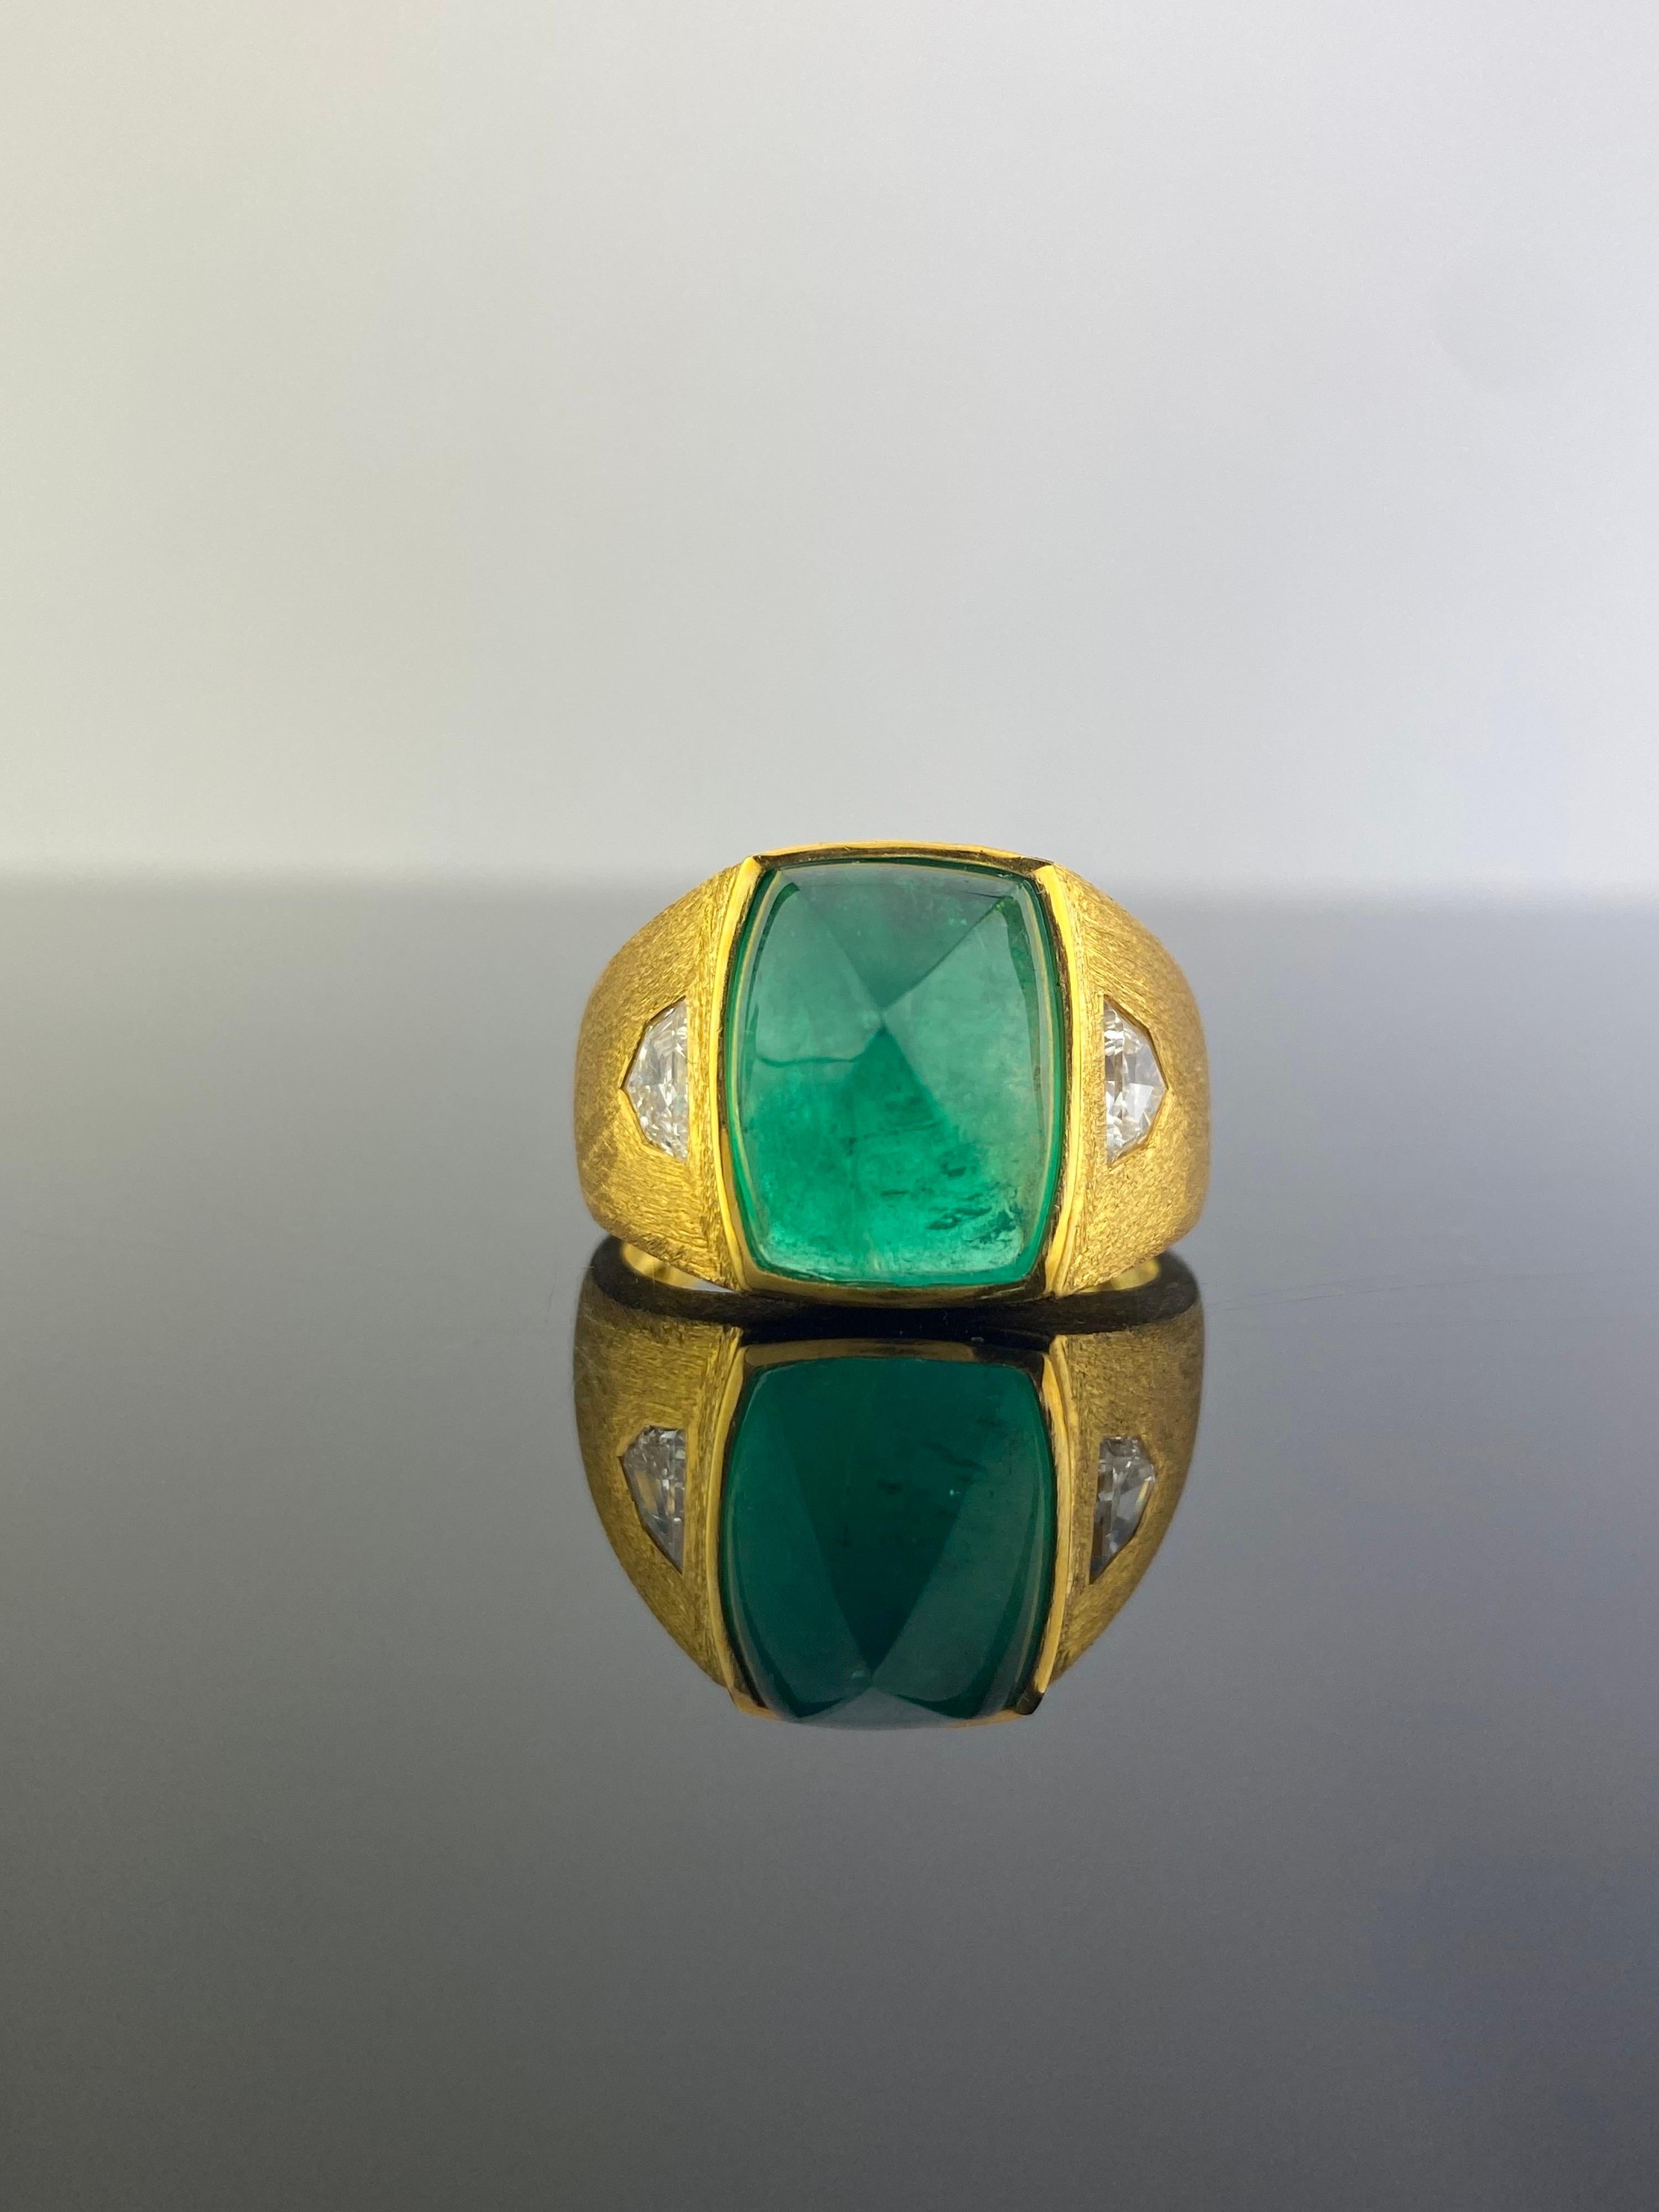 Sugarloaf Cabochon Unisex Certified 8.75 Carat Colombian Emerald and Diamond Signet Ring For Sale